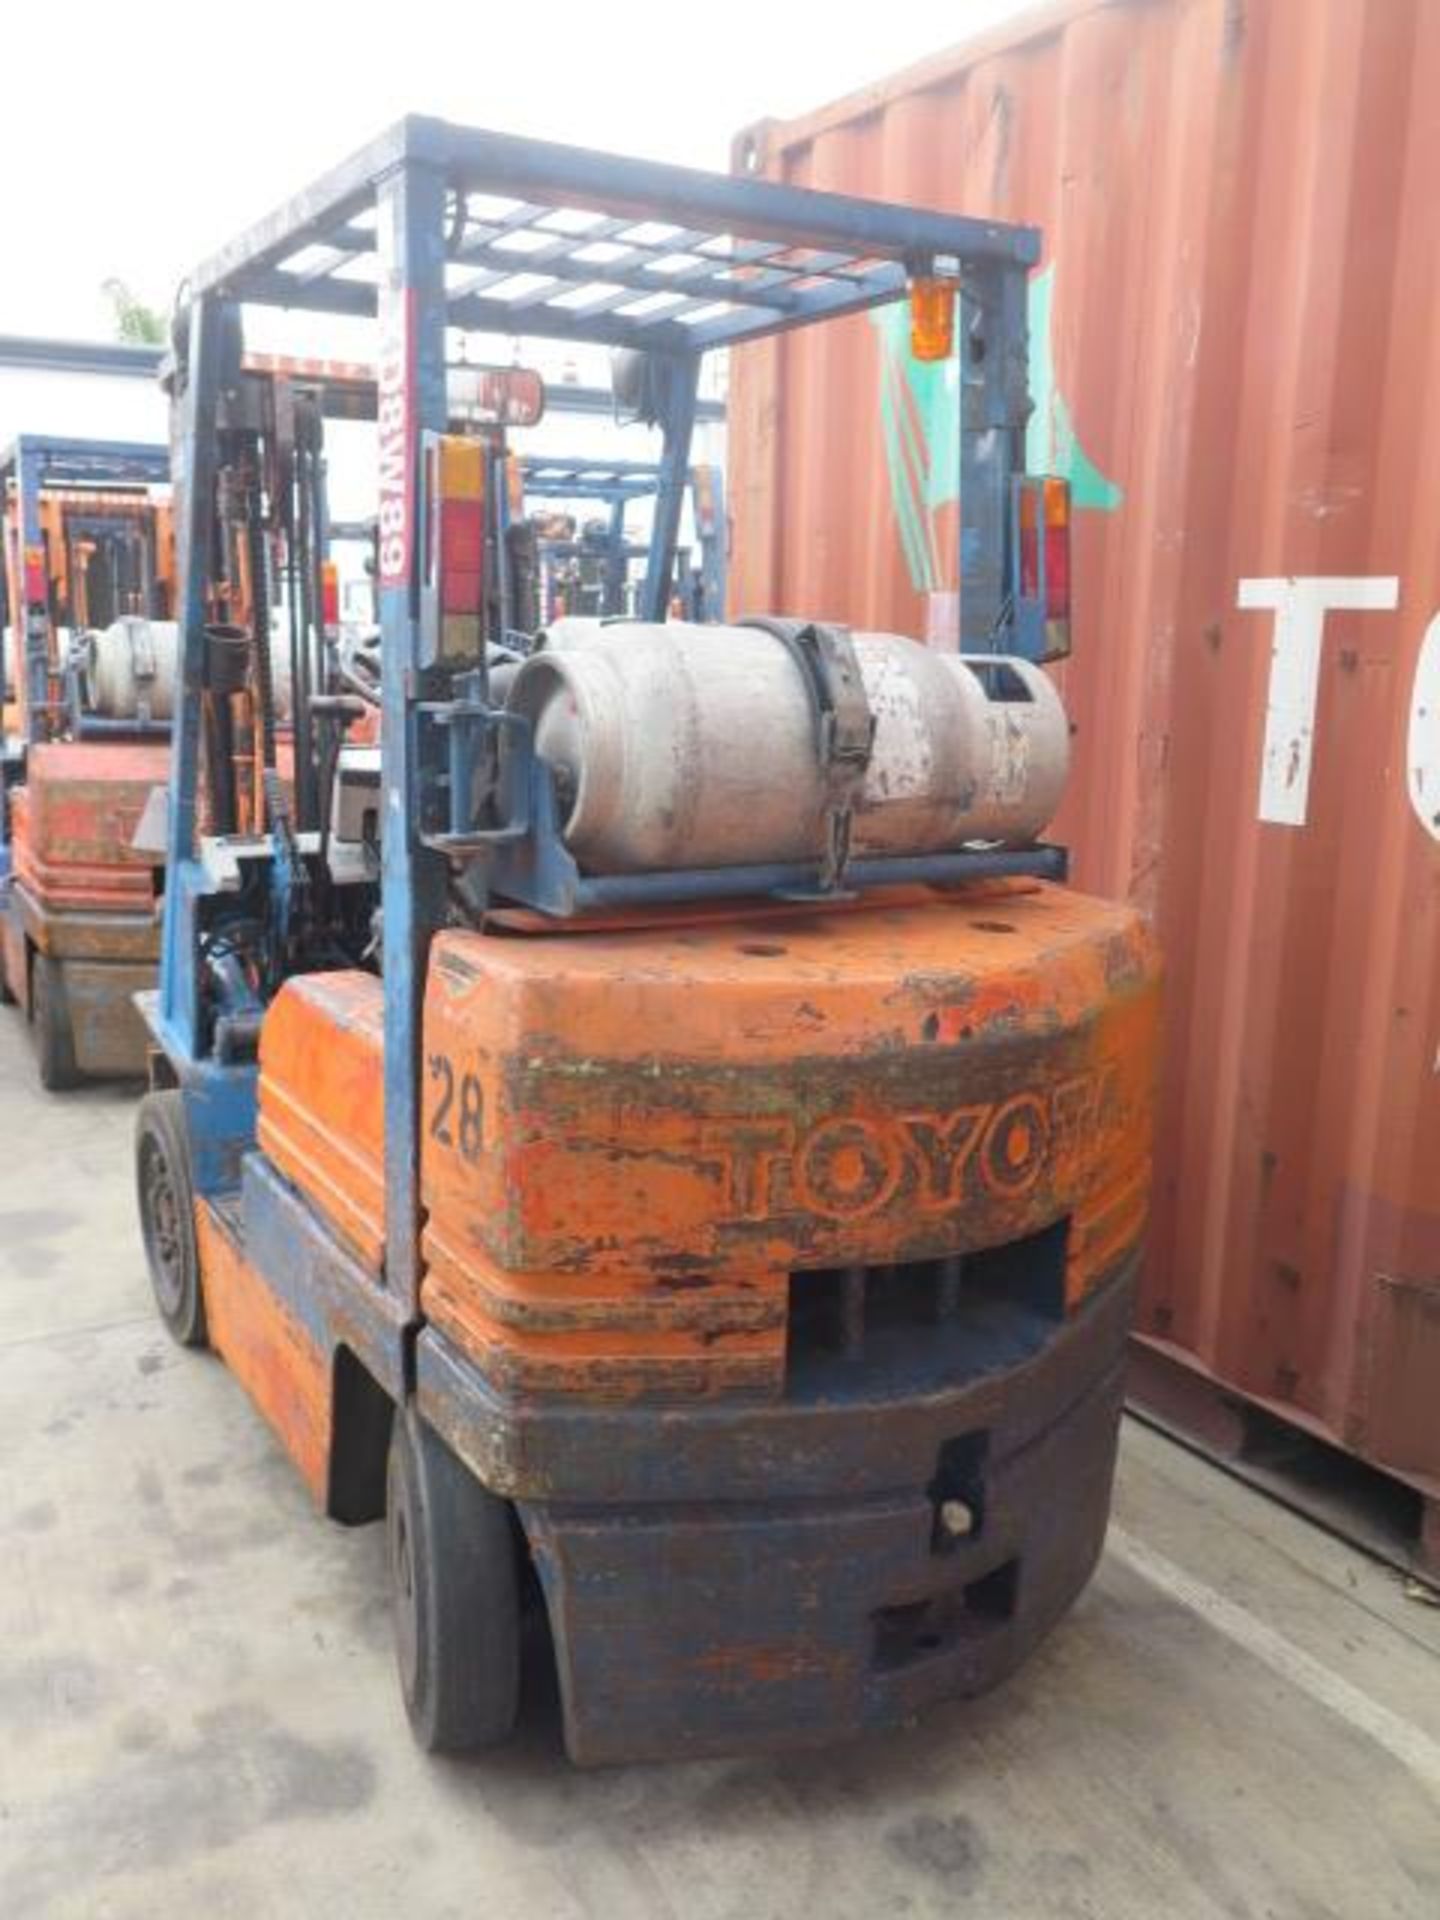 Toyota 5FGC25 5000 Lb Cap LPG Forklift s/n 80467 w/ 3-Stage Mast, 169" Lift Height, Cushion Tires, - Image 3 of 11